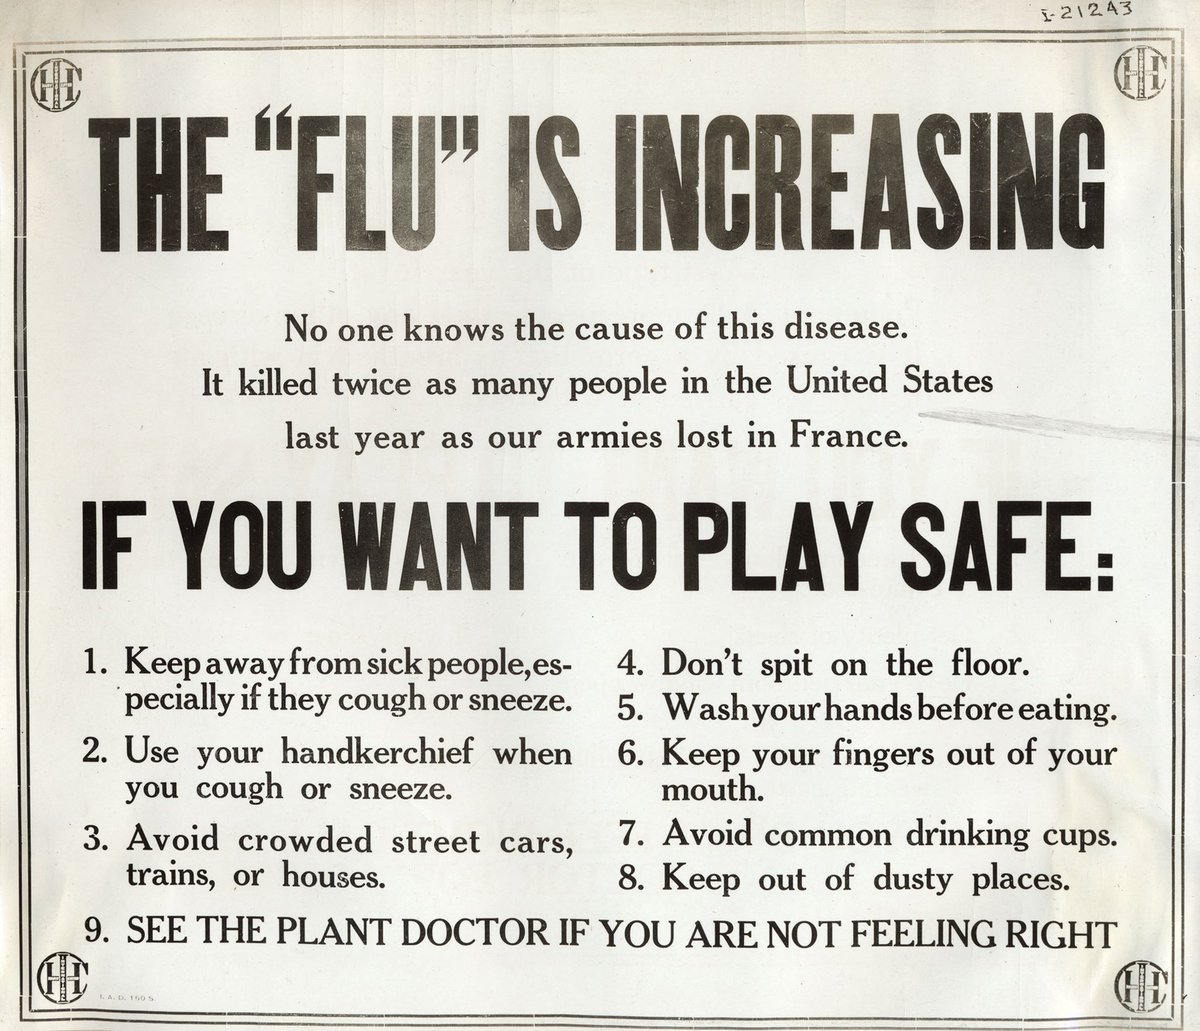 Spanish Flu recommendations from 1919: